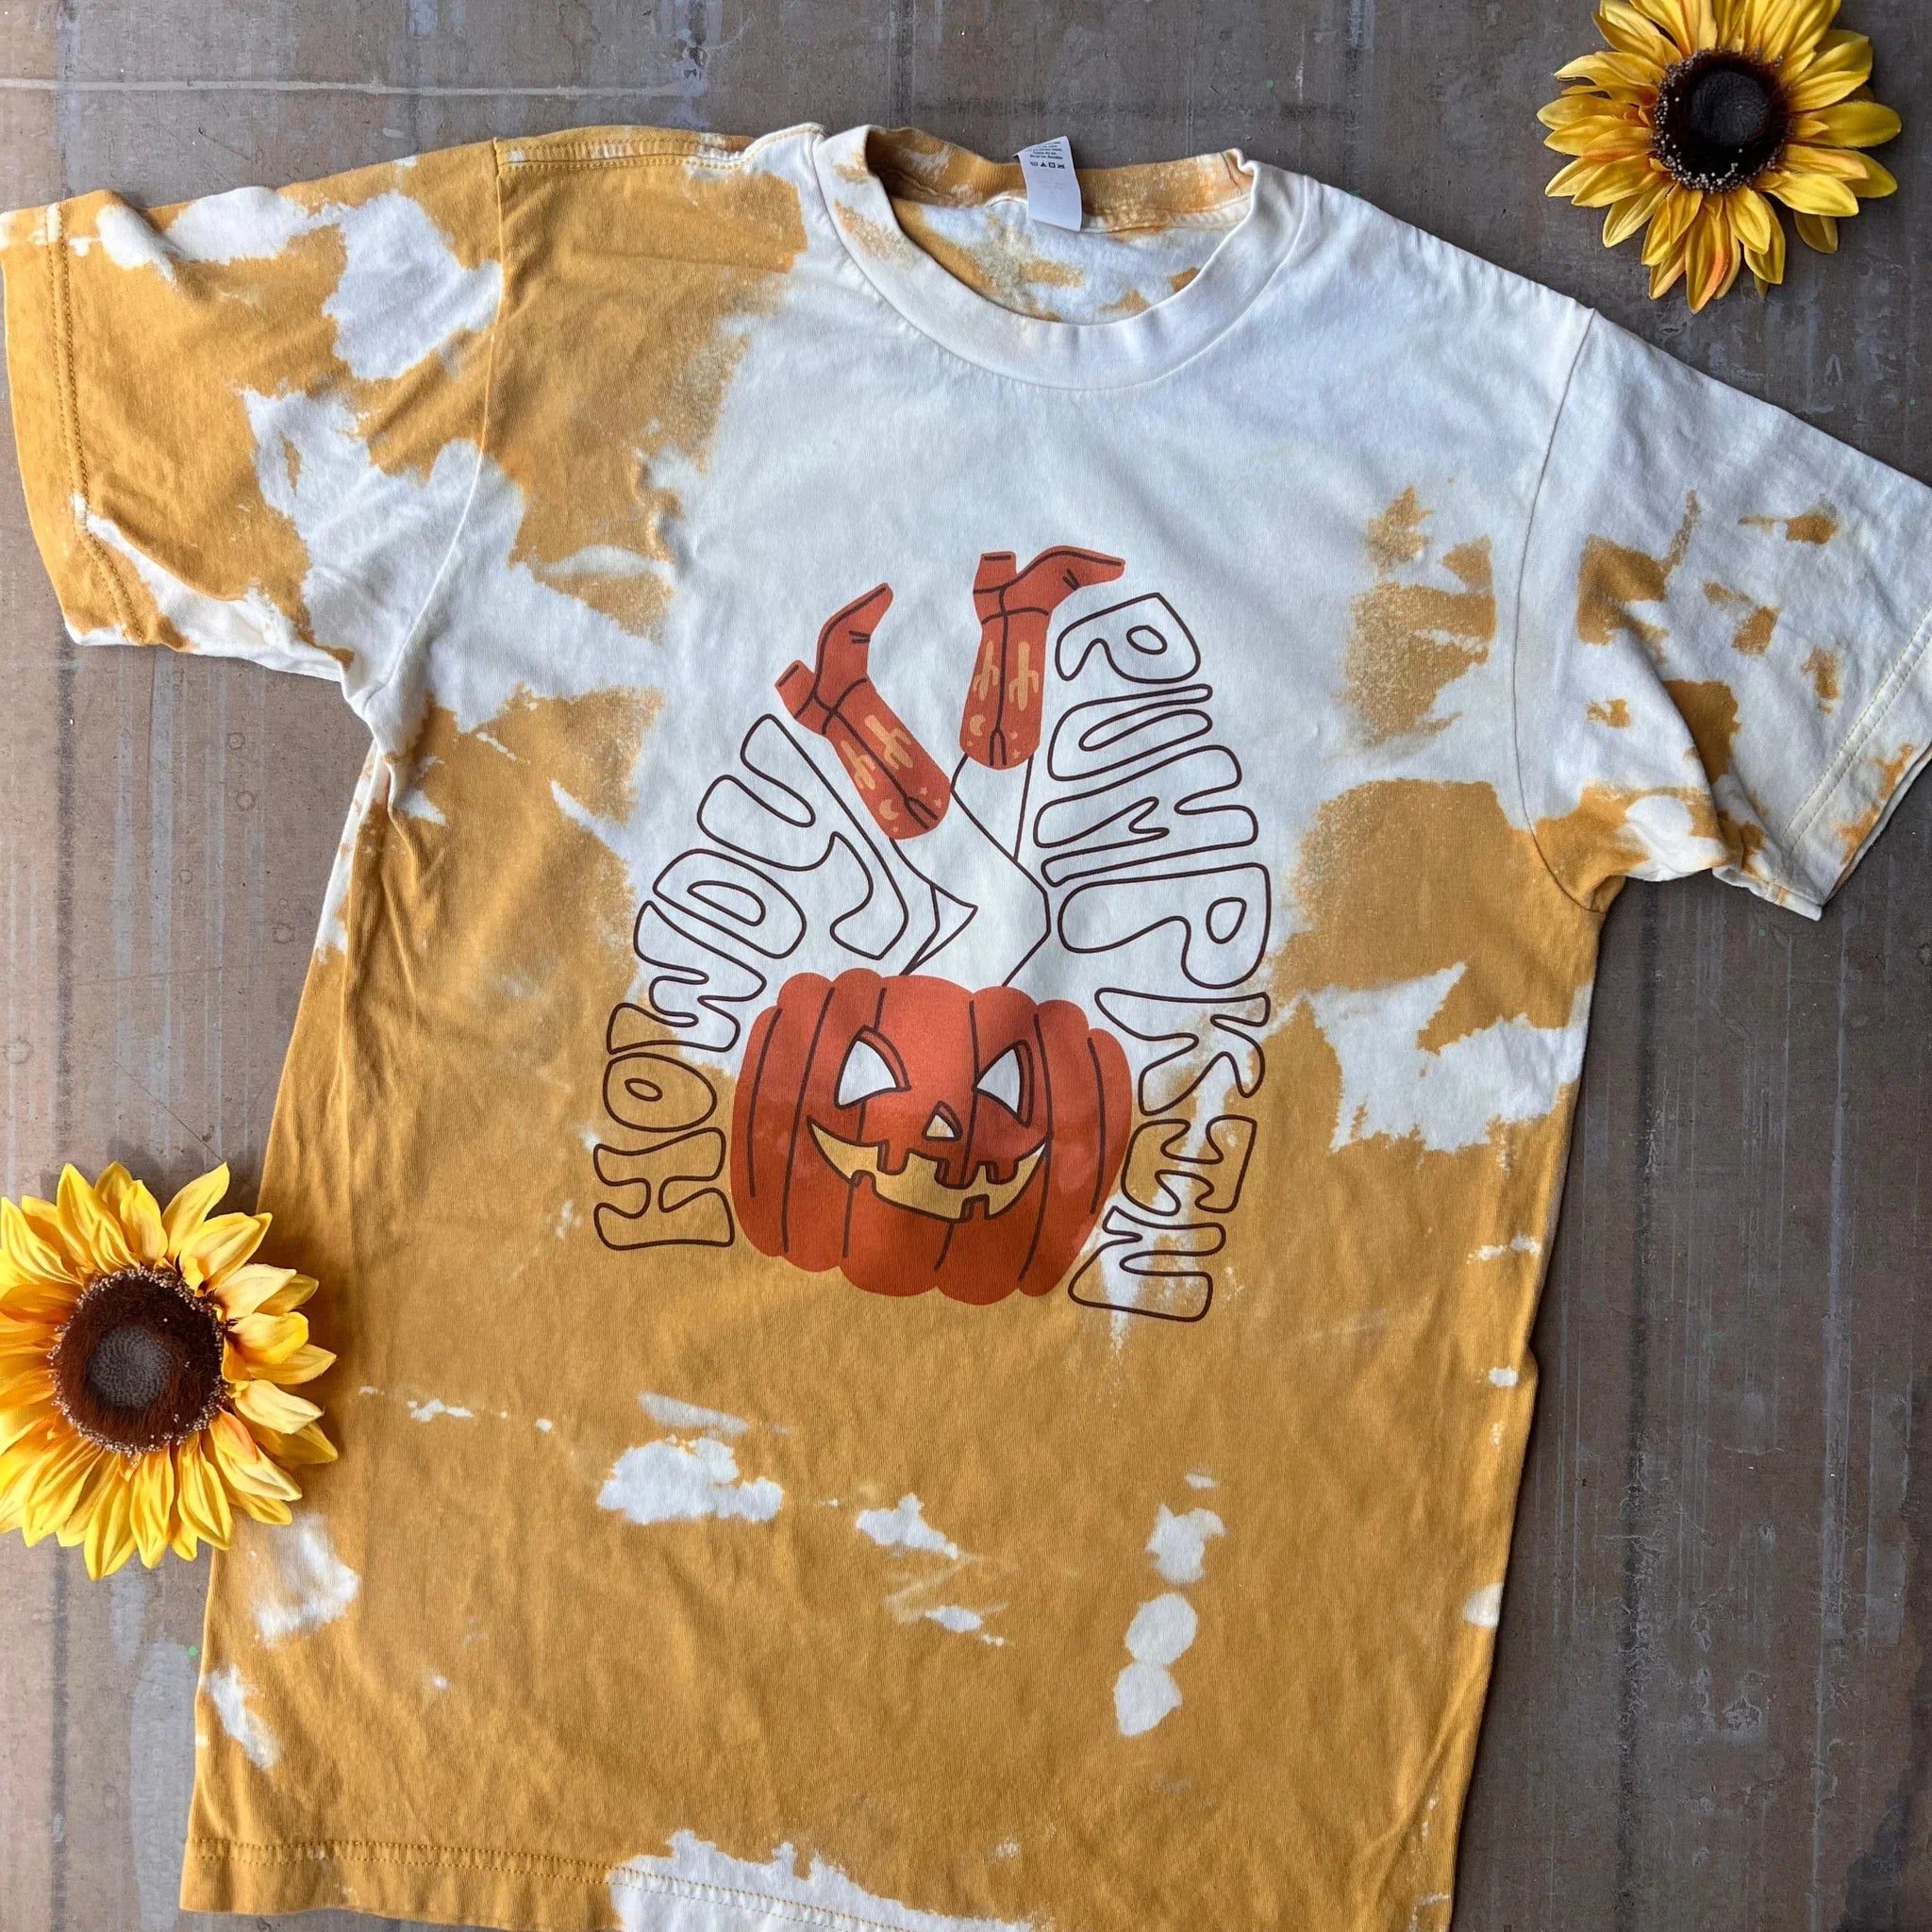 This is a mustard yellow tee that has been bleached. It says howdy pumpkin in black bubble letters with a pumpkin with cowgirl legs sticking out of it. The words howdy pumpkin are surrounding the pumpkin and cowgirl legs. There are also two sunflowers in the background of this picture.